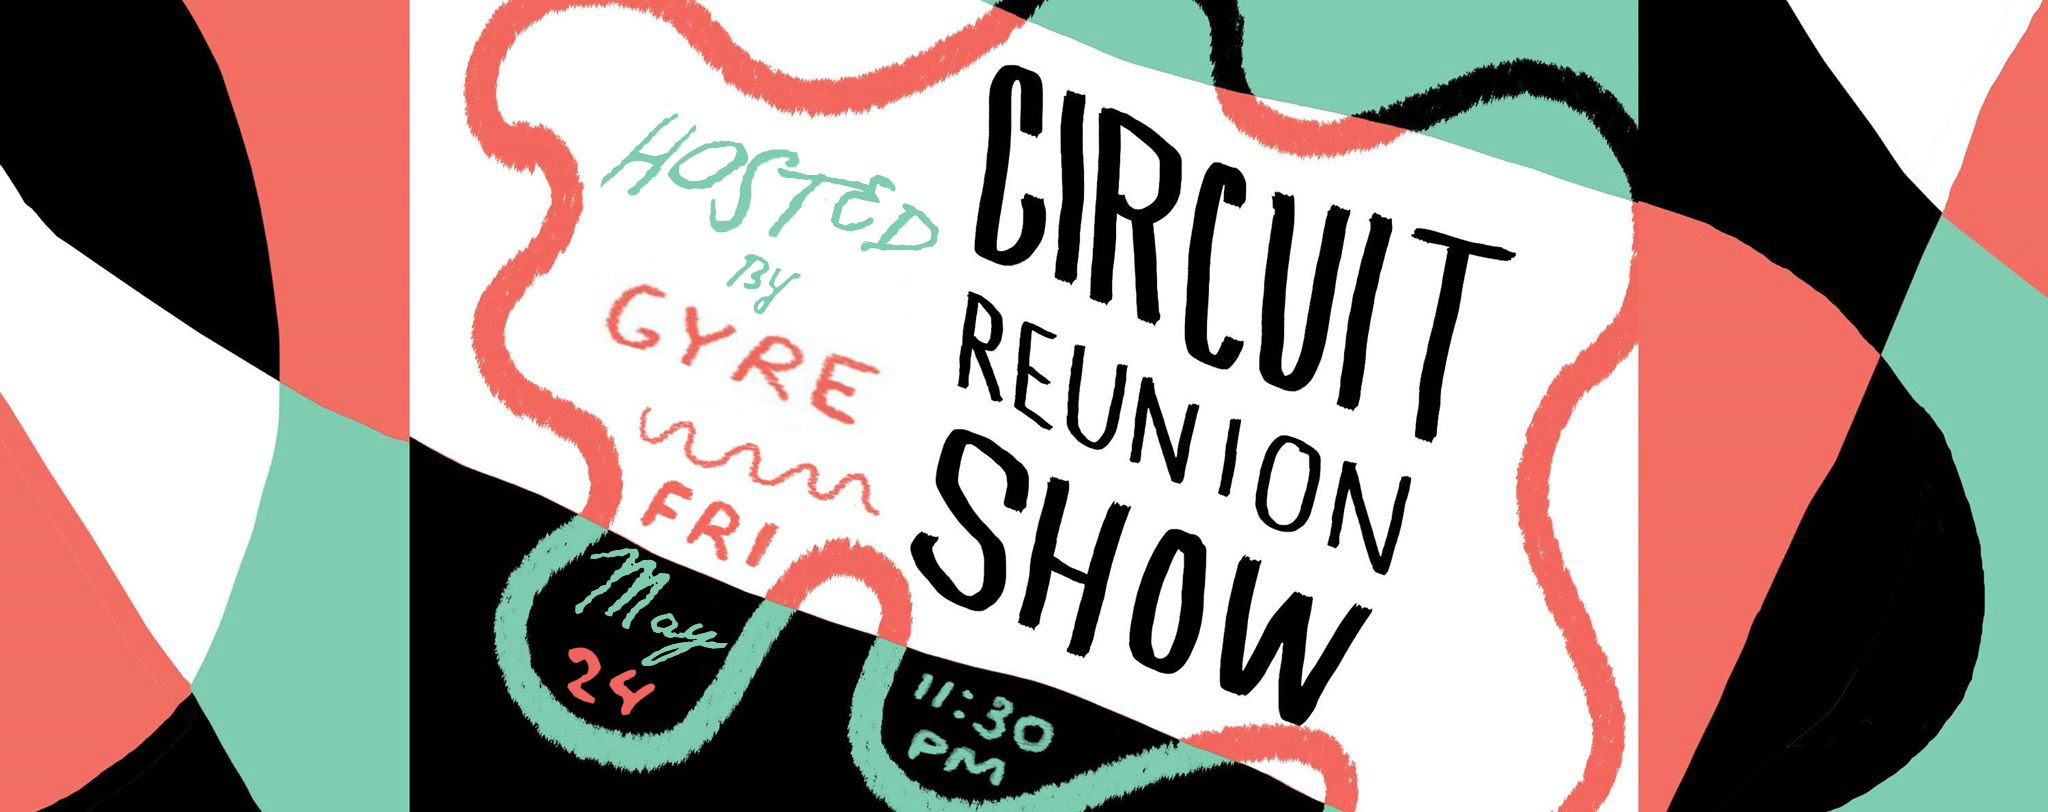 GYRE Presents: The Circuit Reunion Show